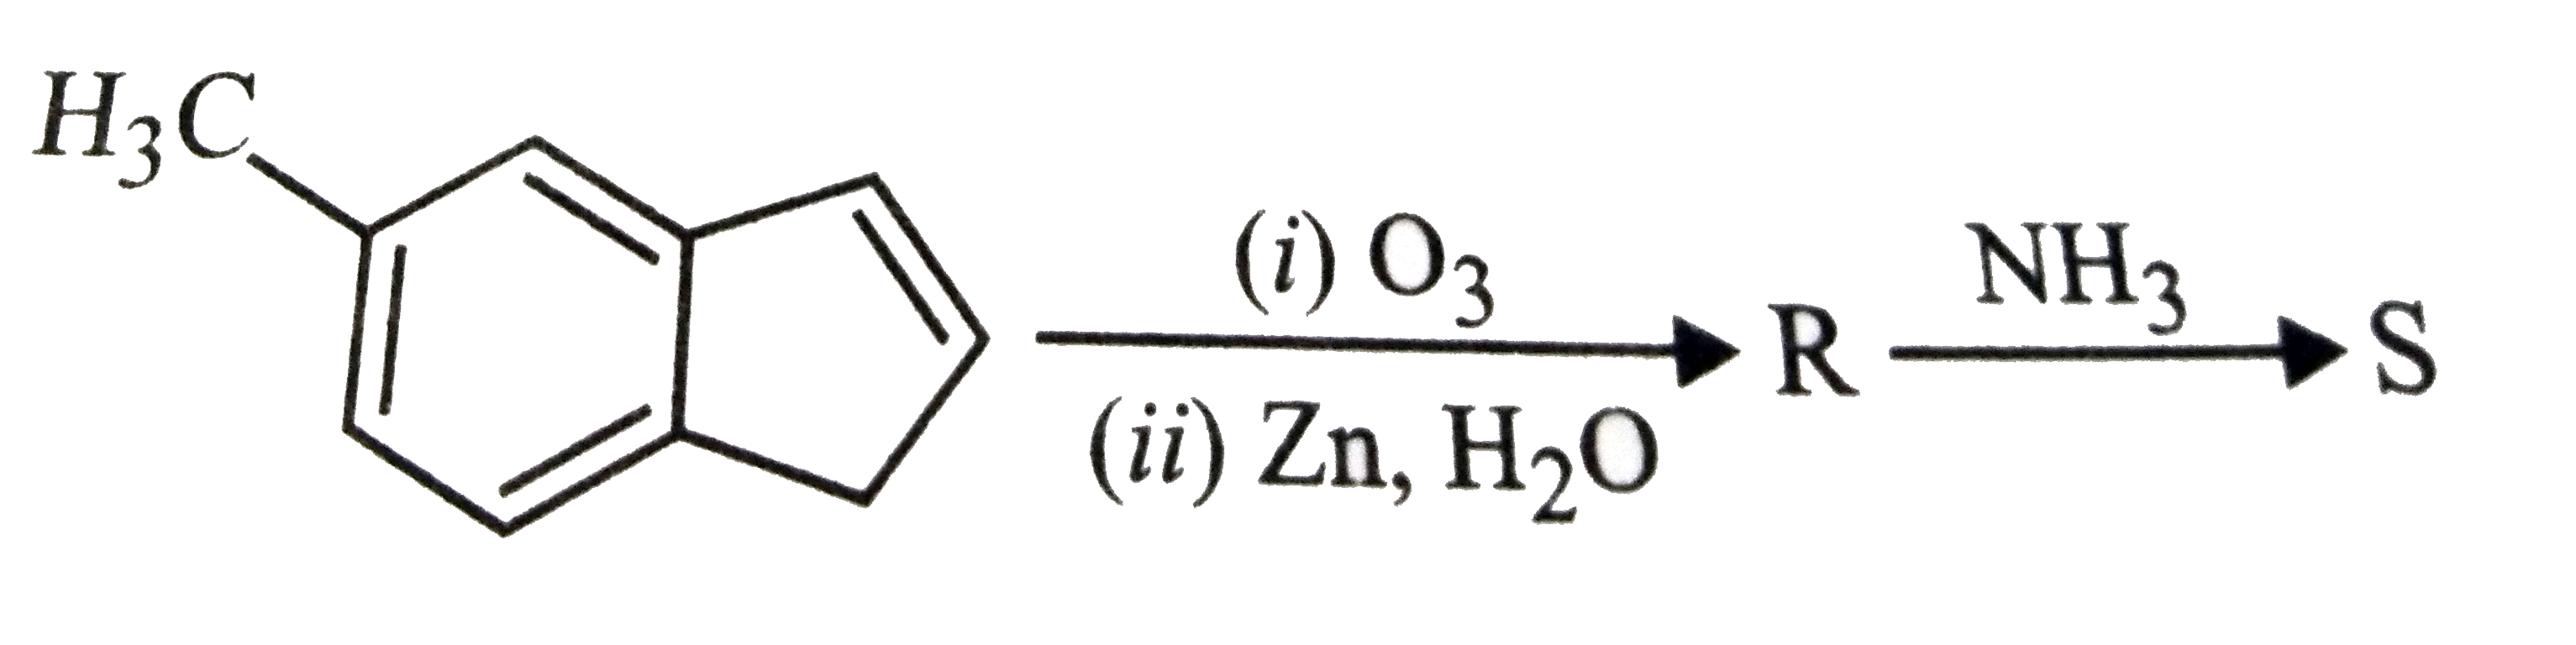 In the following reactions, the product S is